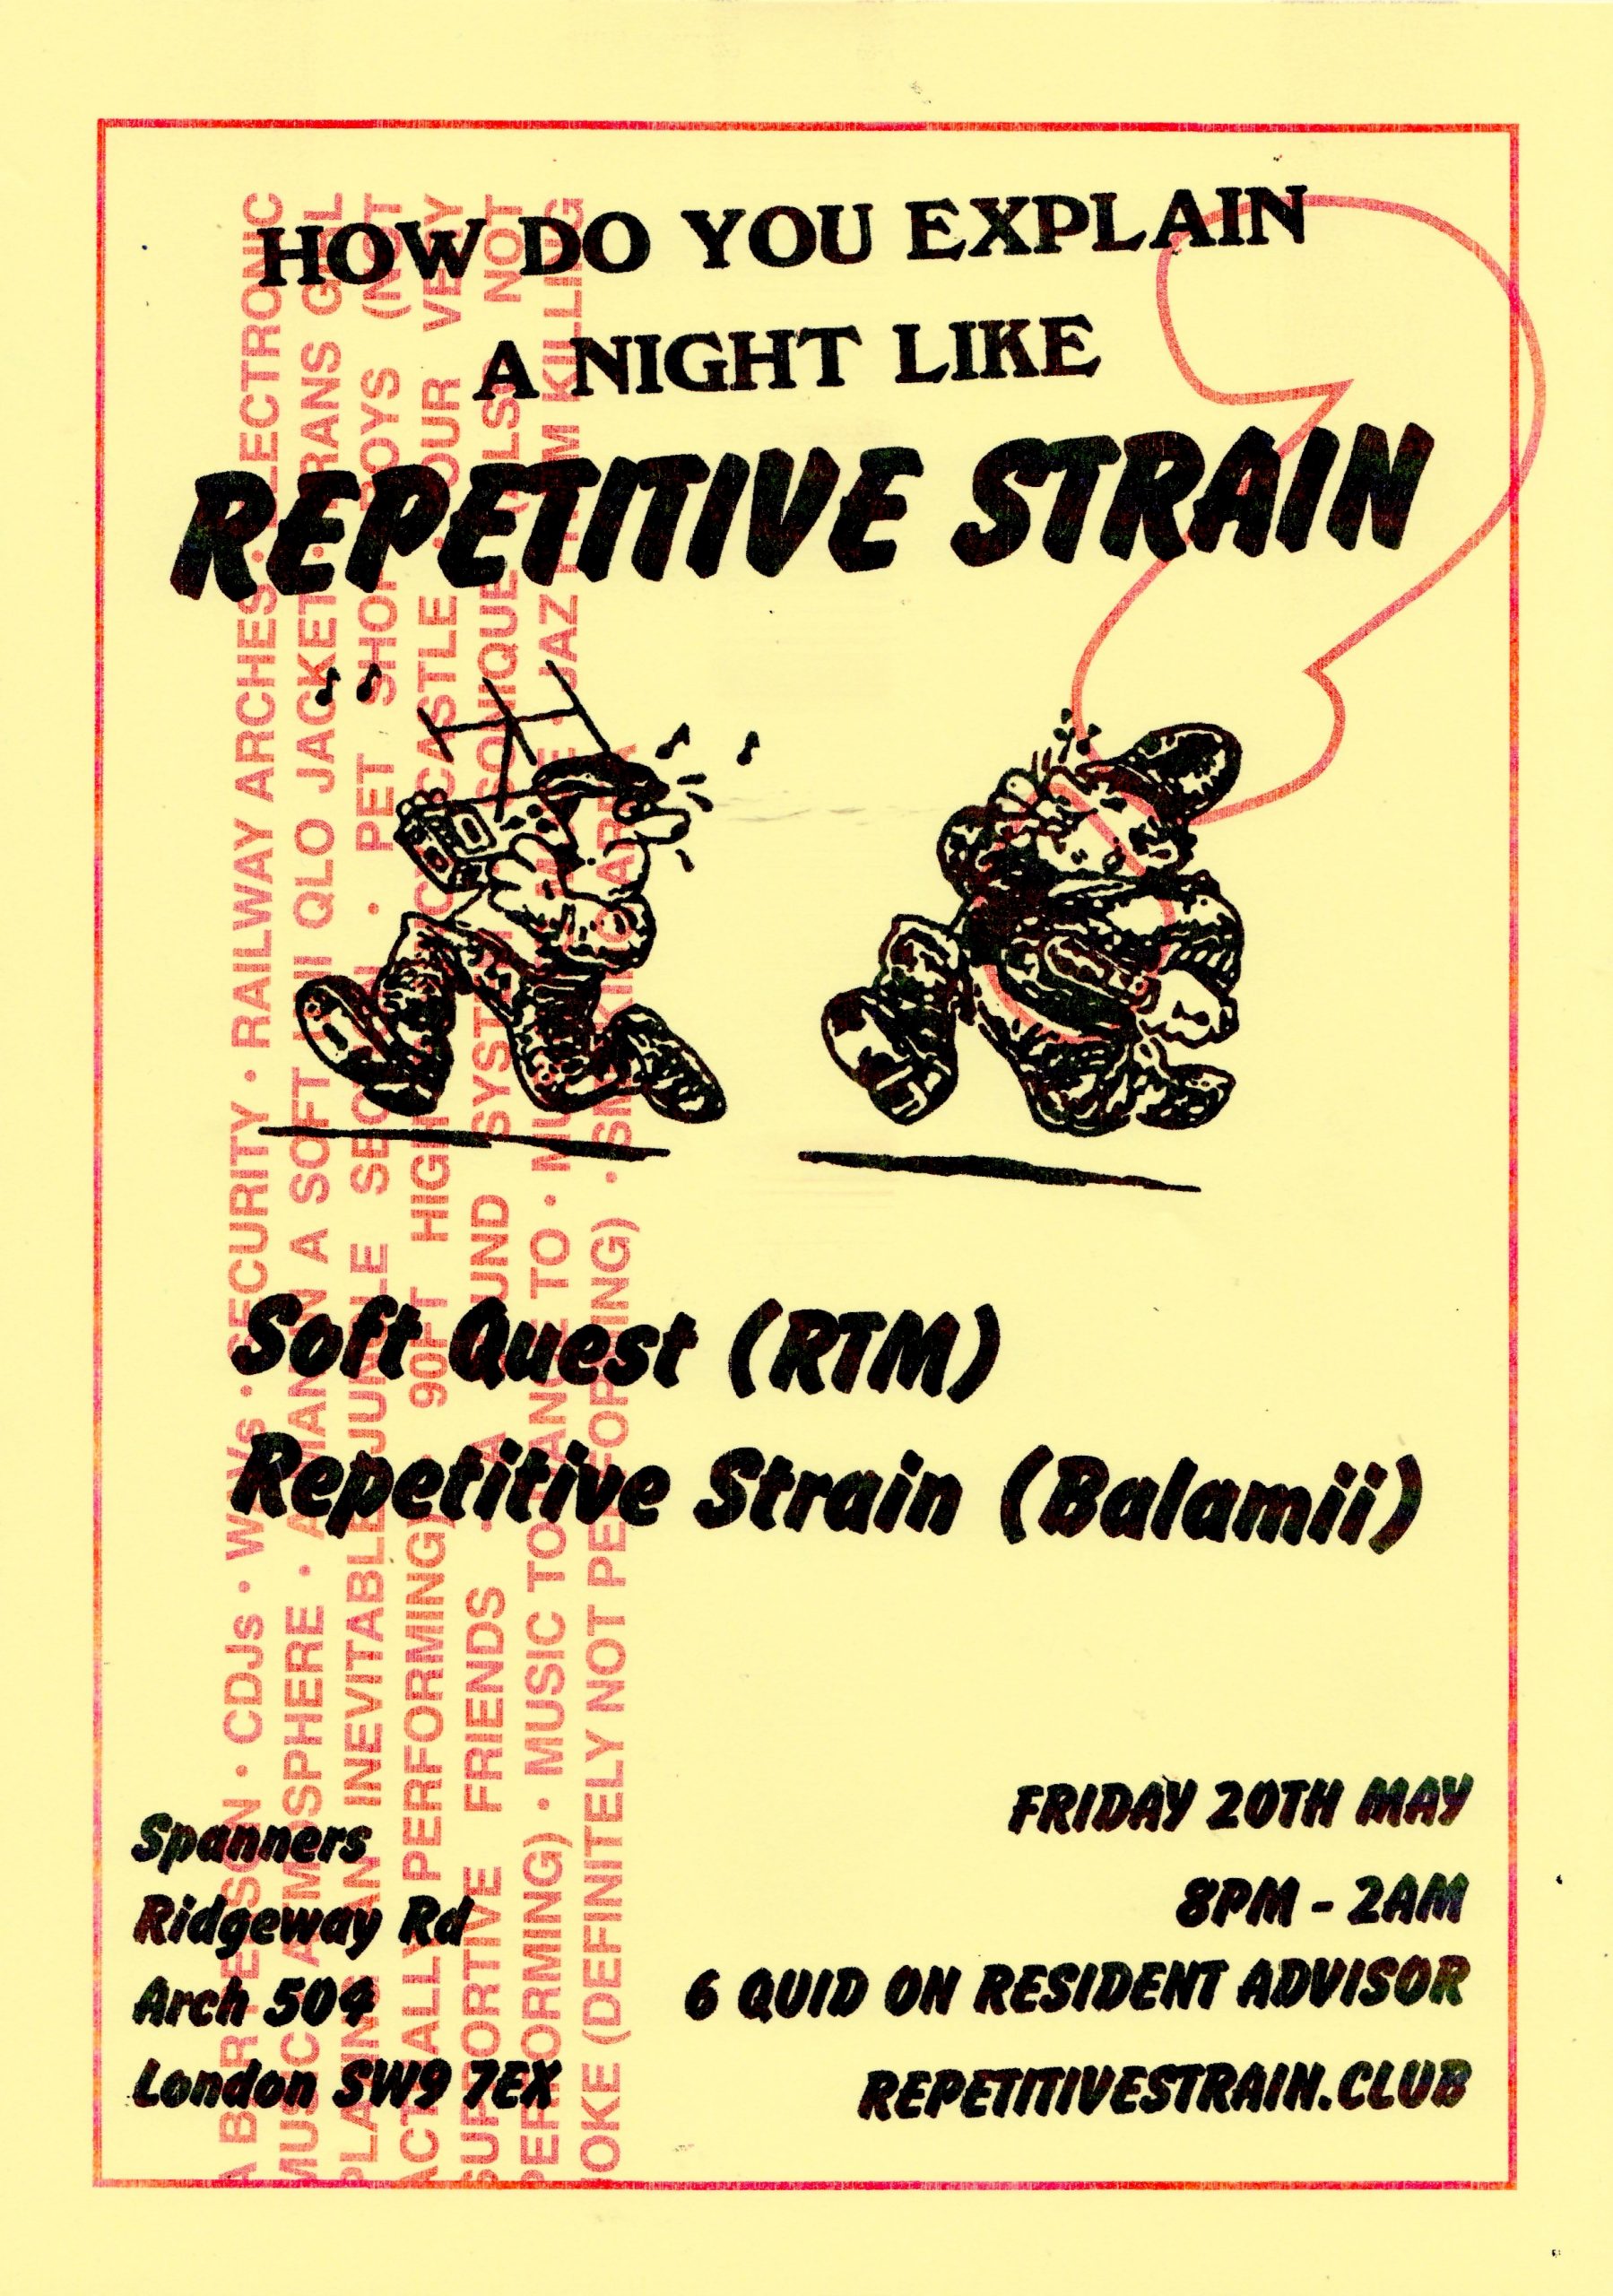 Repetitive Strain live at Spanners, Friday 20th May